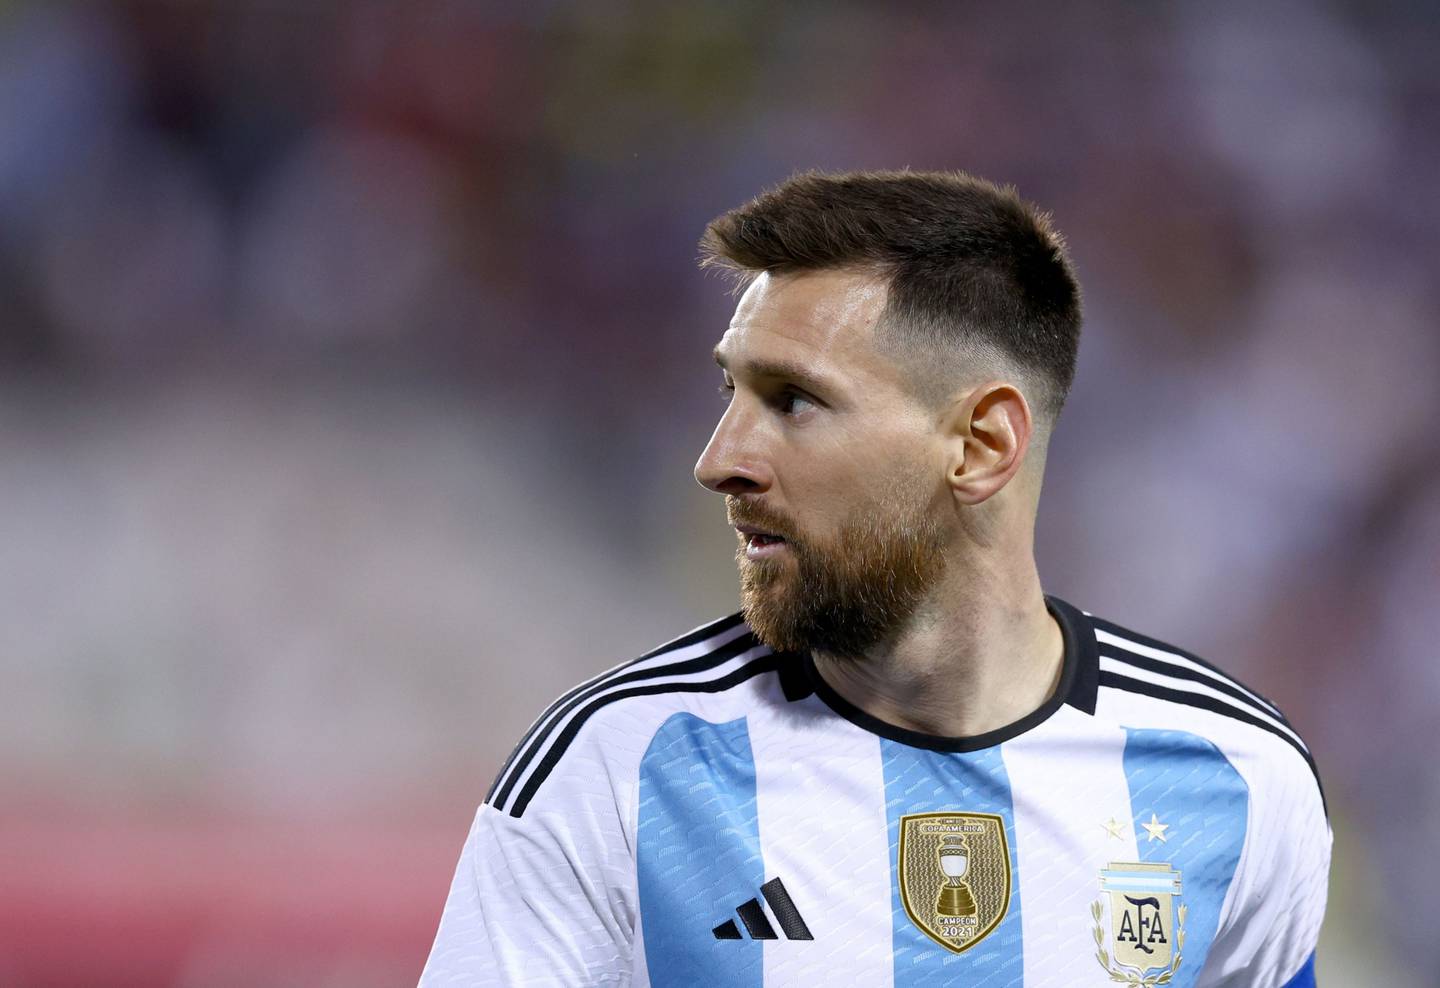 Messi receives royalty payments that comprise 12% of net sales, according to the IPO filing.